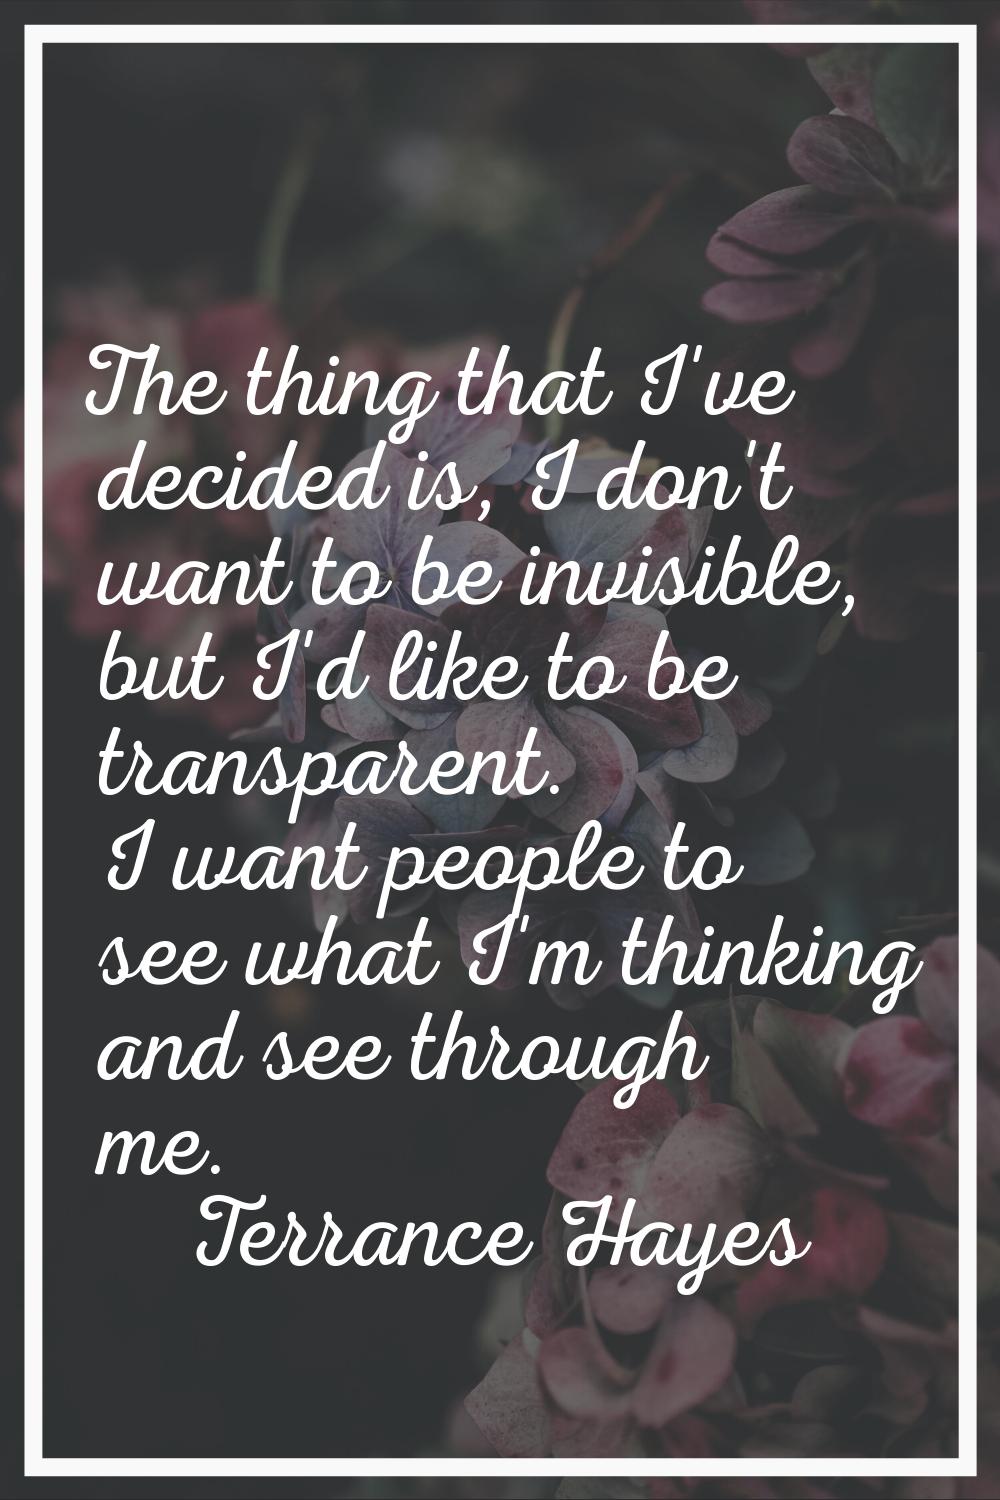 The thing that I've decided is, I don't want to be invisible, but I'd like to be transparent. I wan